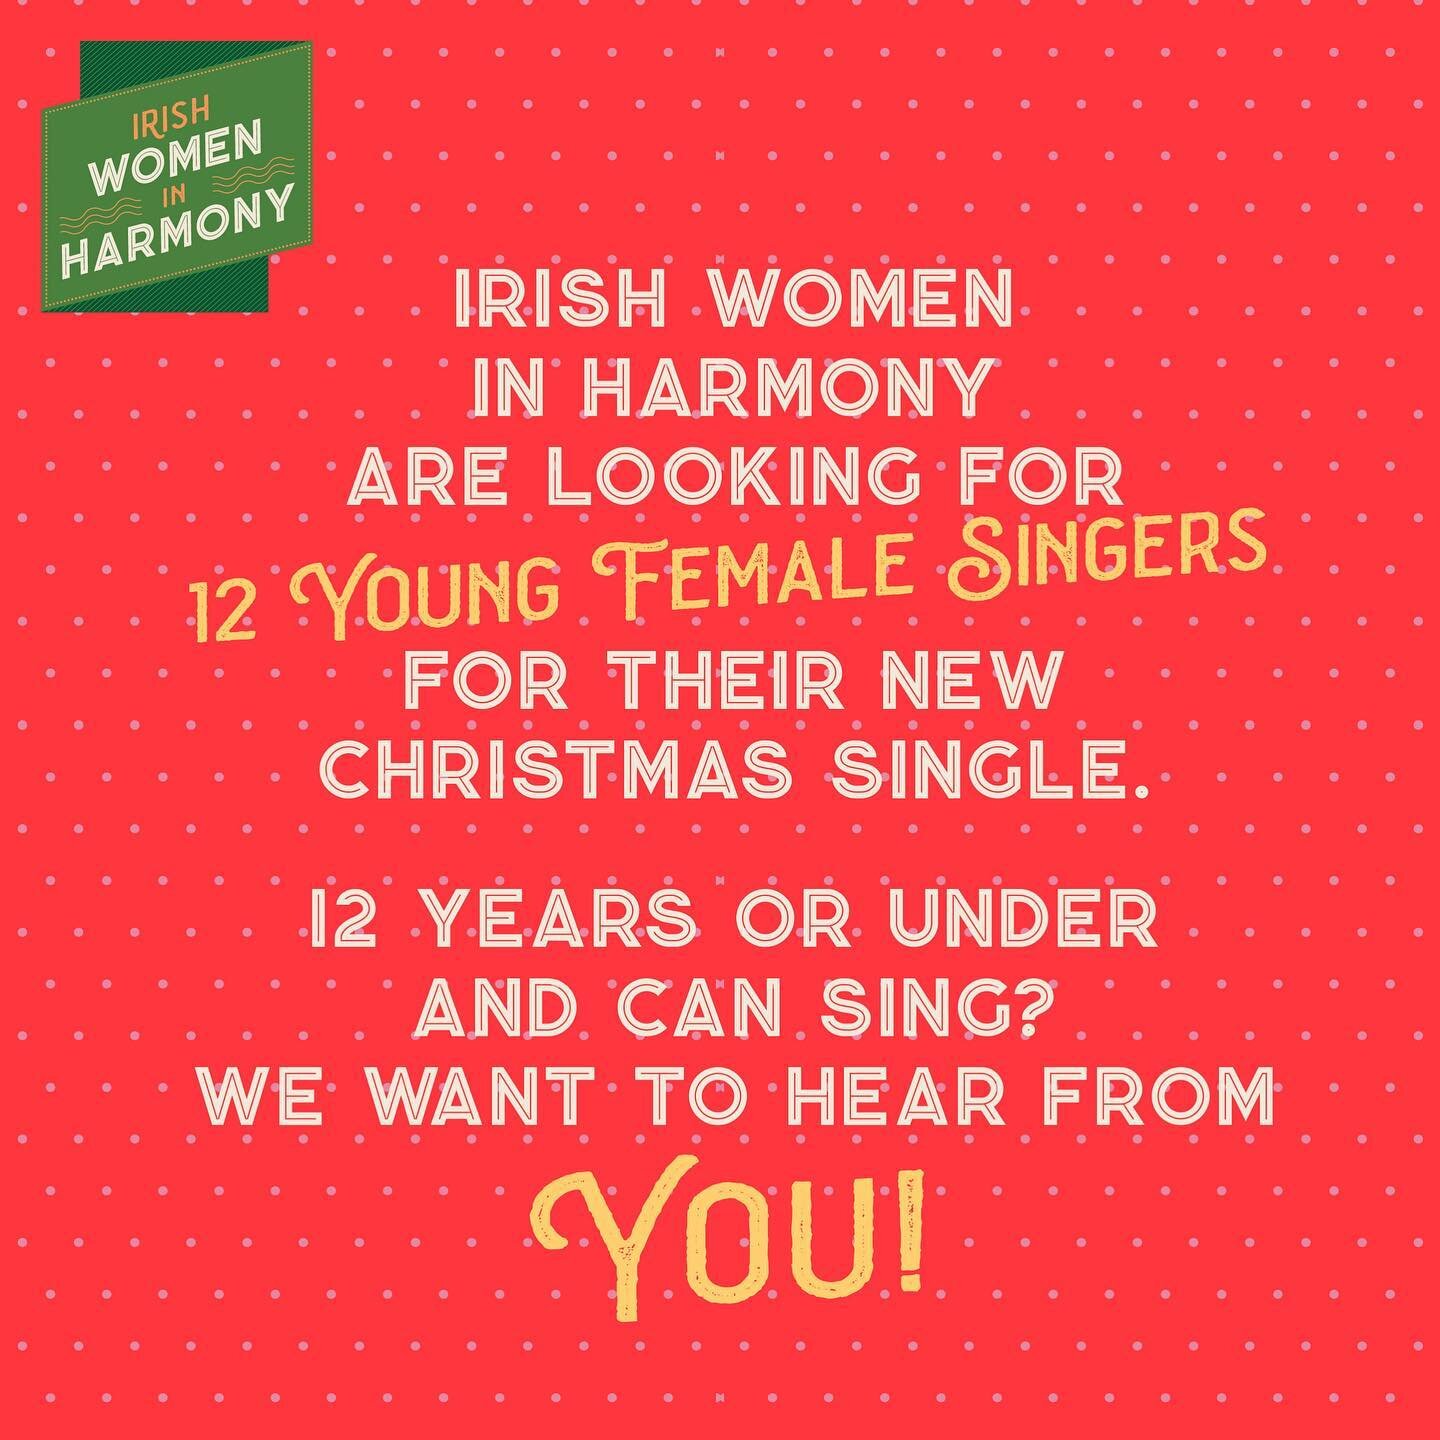 ANNOUNCEMENT!! Do you love to sing? We want you to be apart of our Xmas project. Swipe right for details &amp; get involved in our nationwide, open call out and spread the news far &amp; wide. #IWIHsearch